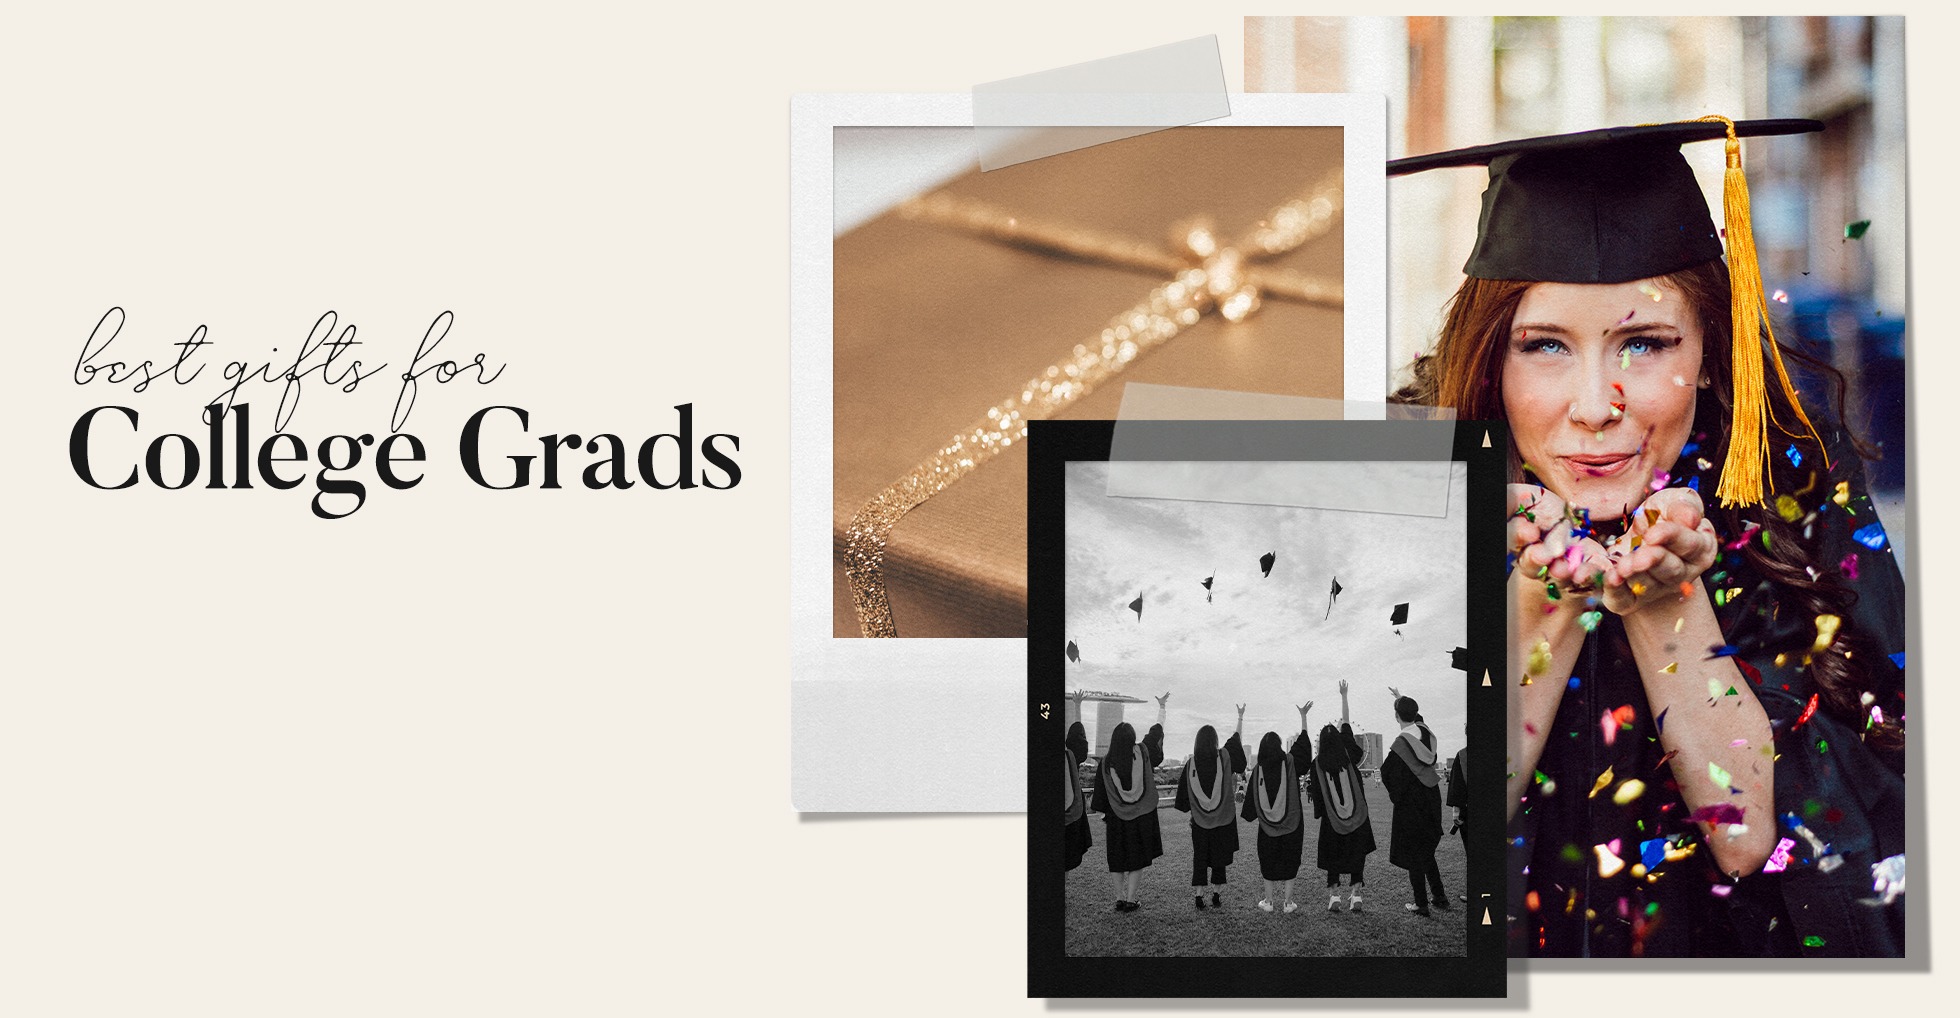 7 Best College Graduation Gifts They’ll Use On Their Next Adventure